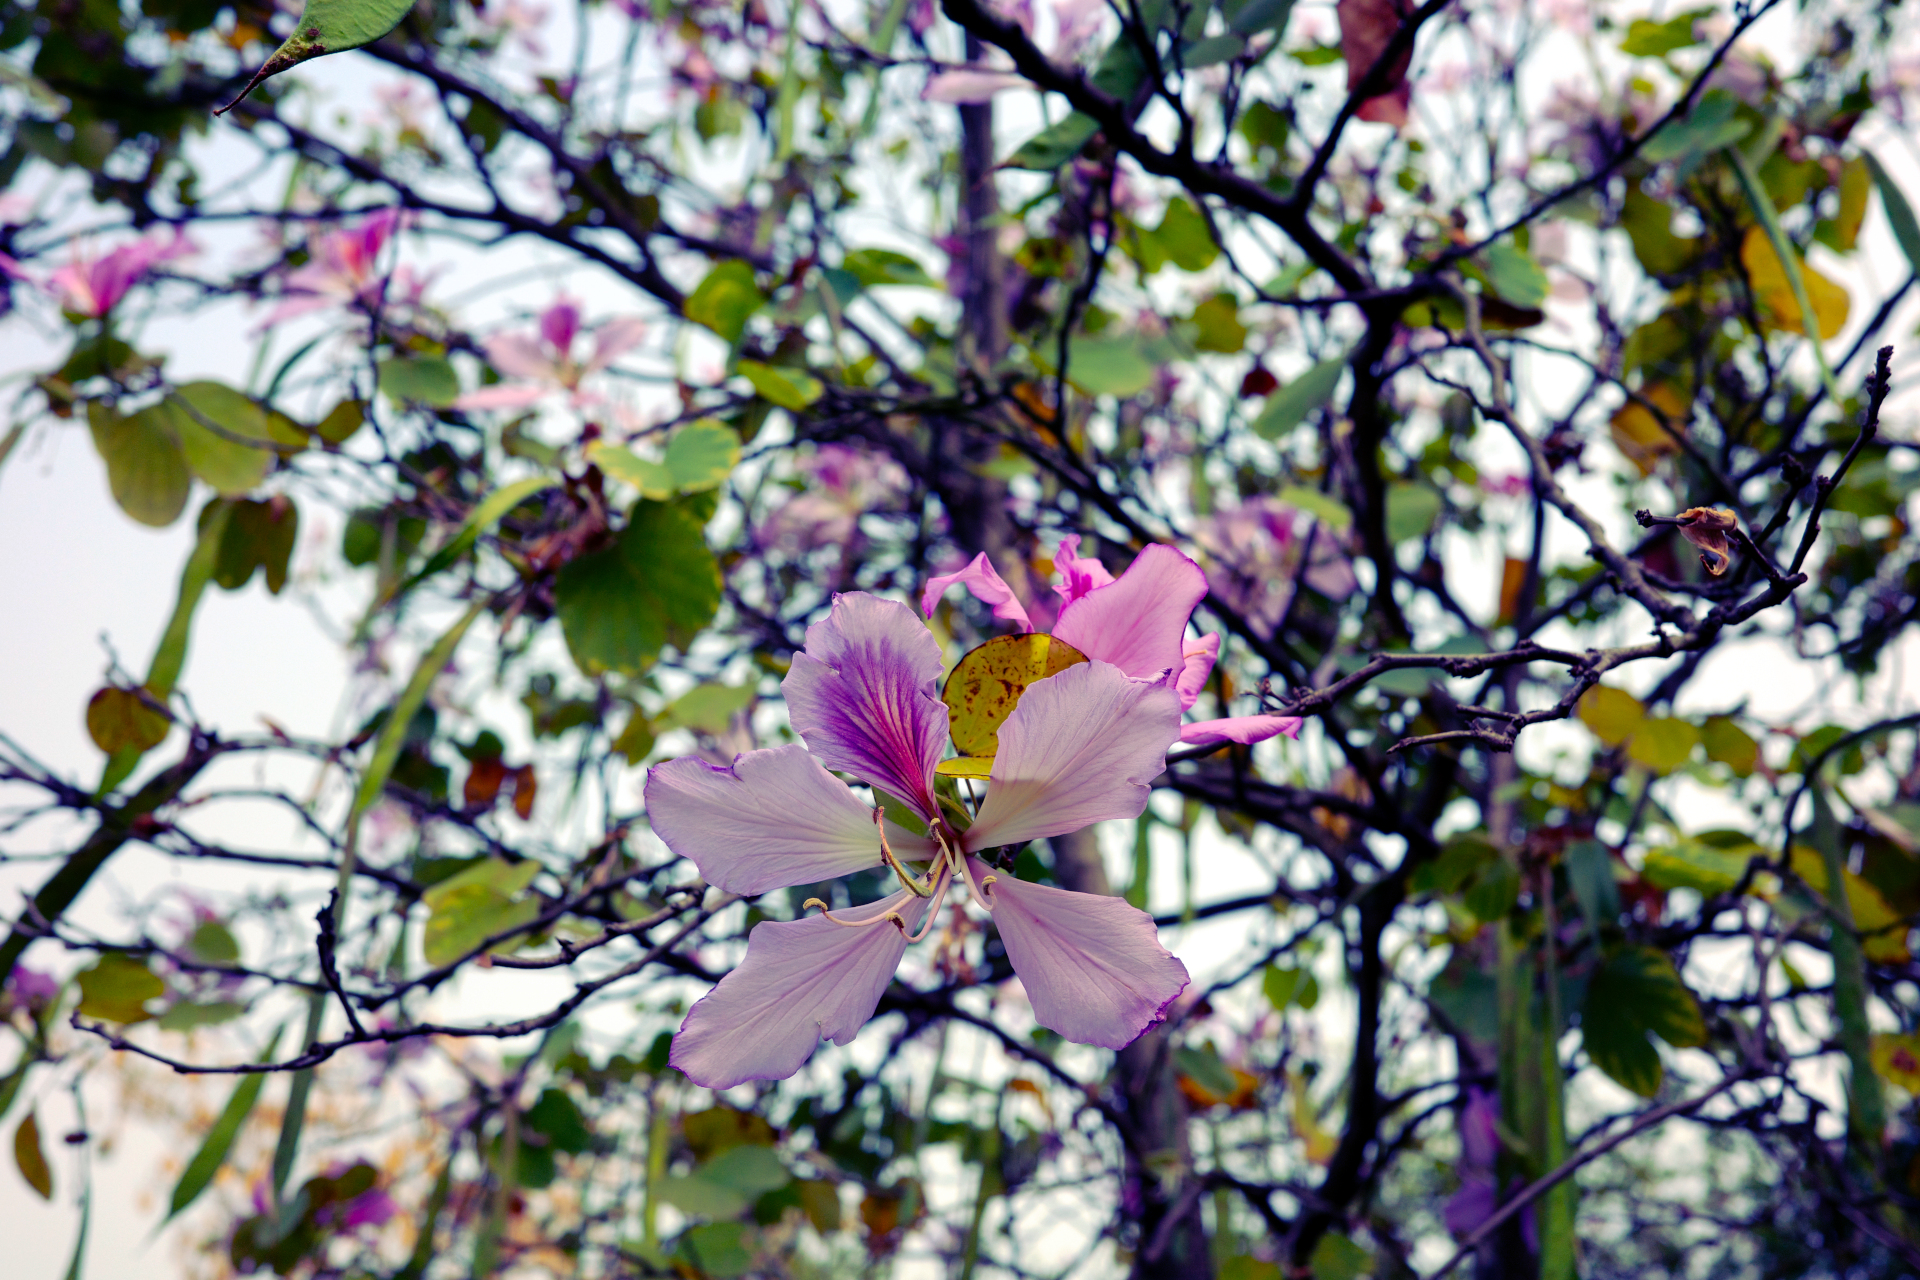 A flower in Paifang Park